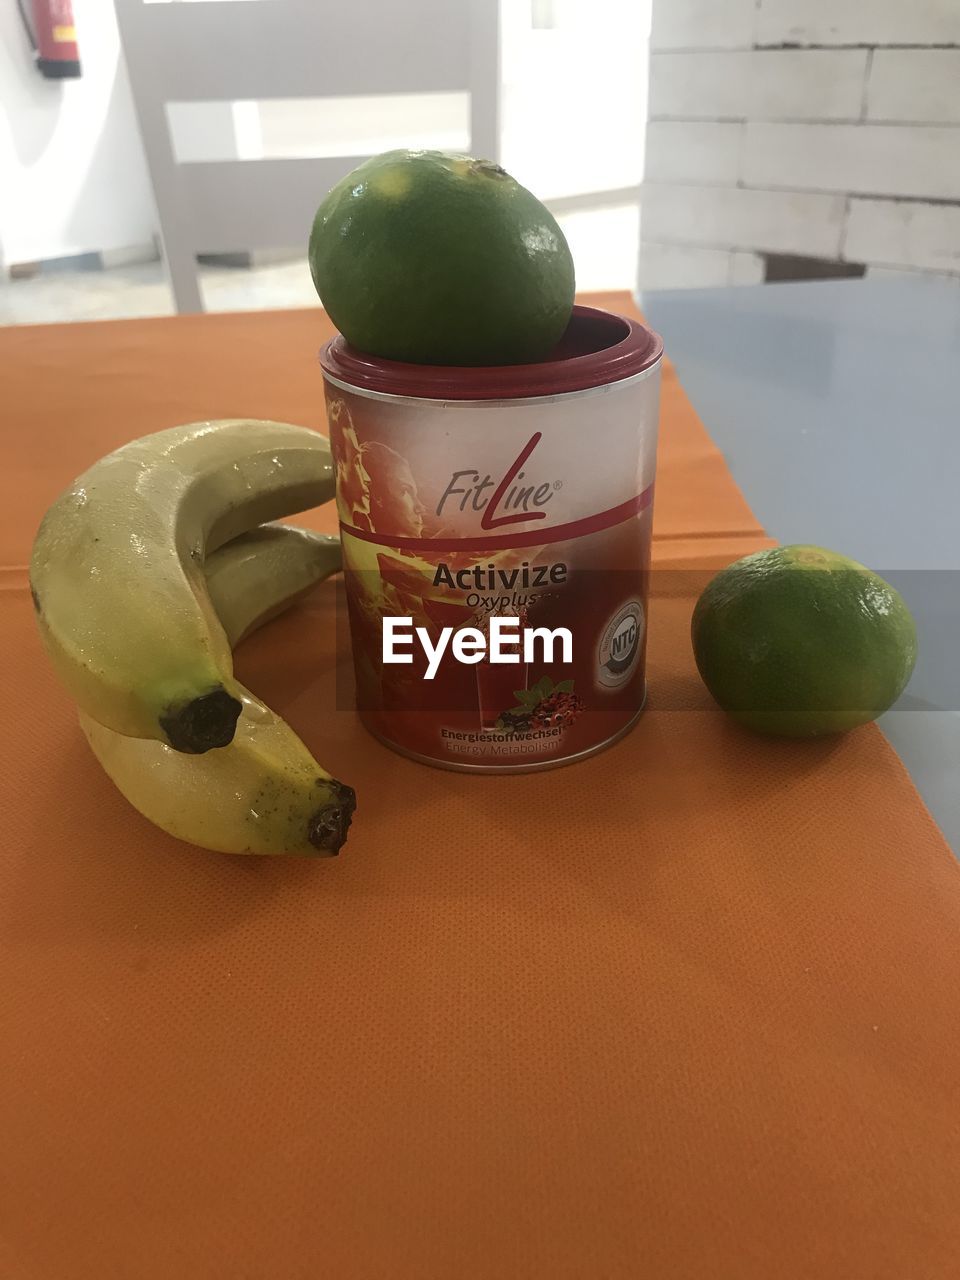 HIGH ANGLE VIEW OF FRUITS IN CONTAINER ON TABLE